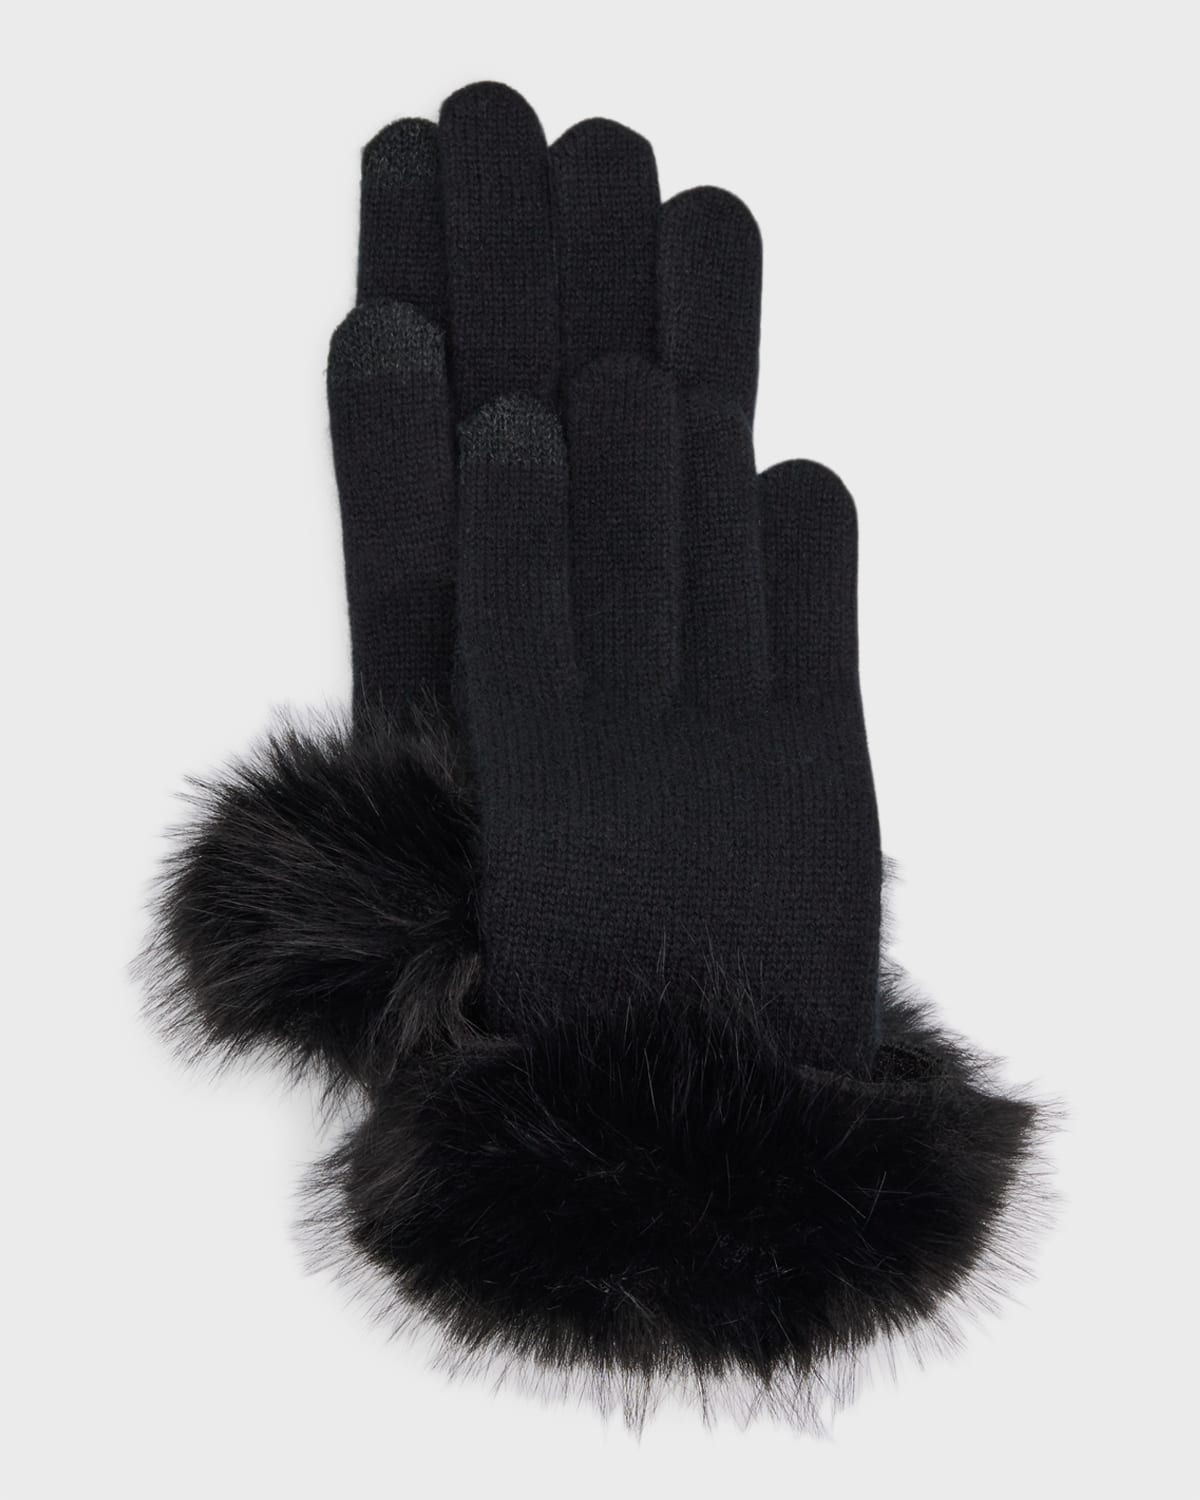 Sofia Cashmere Touchscreen Cashmere & Faux Fur Gloves In Oatmeal